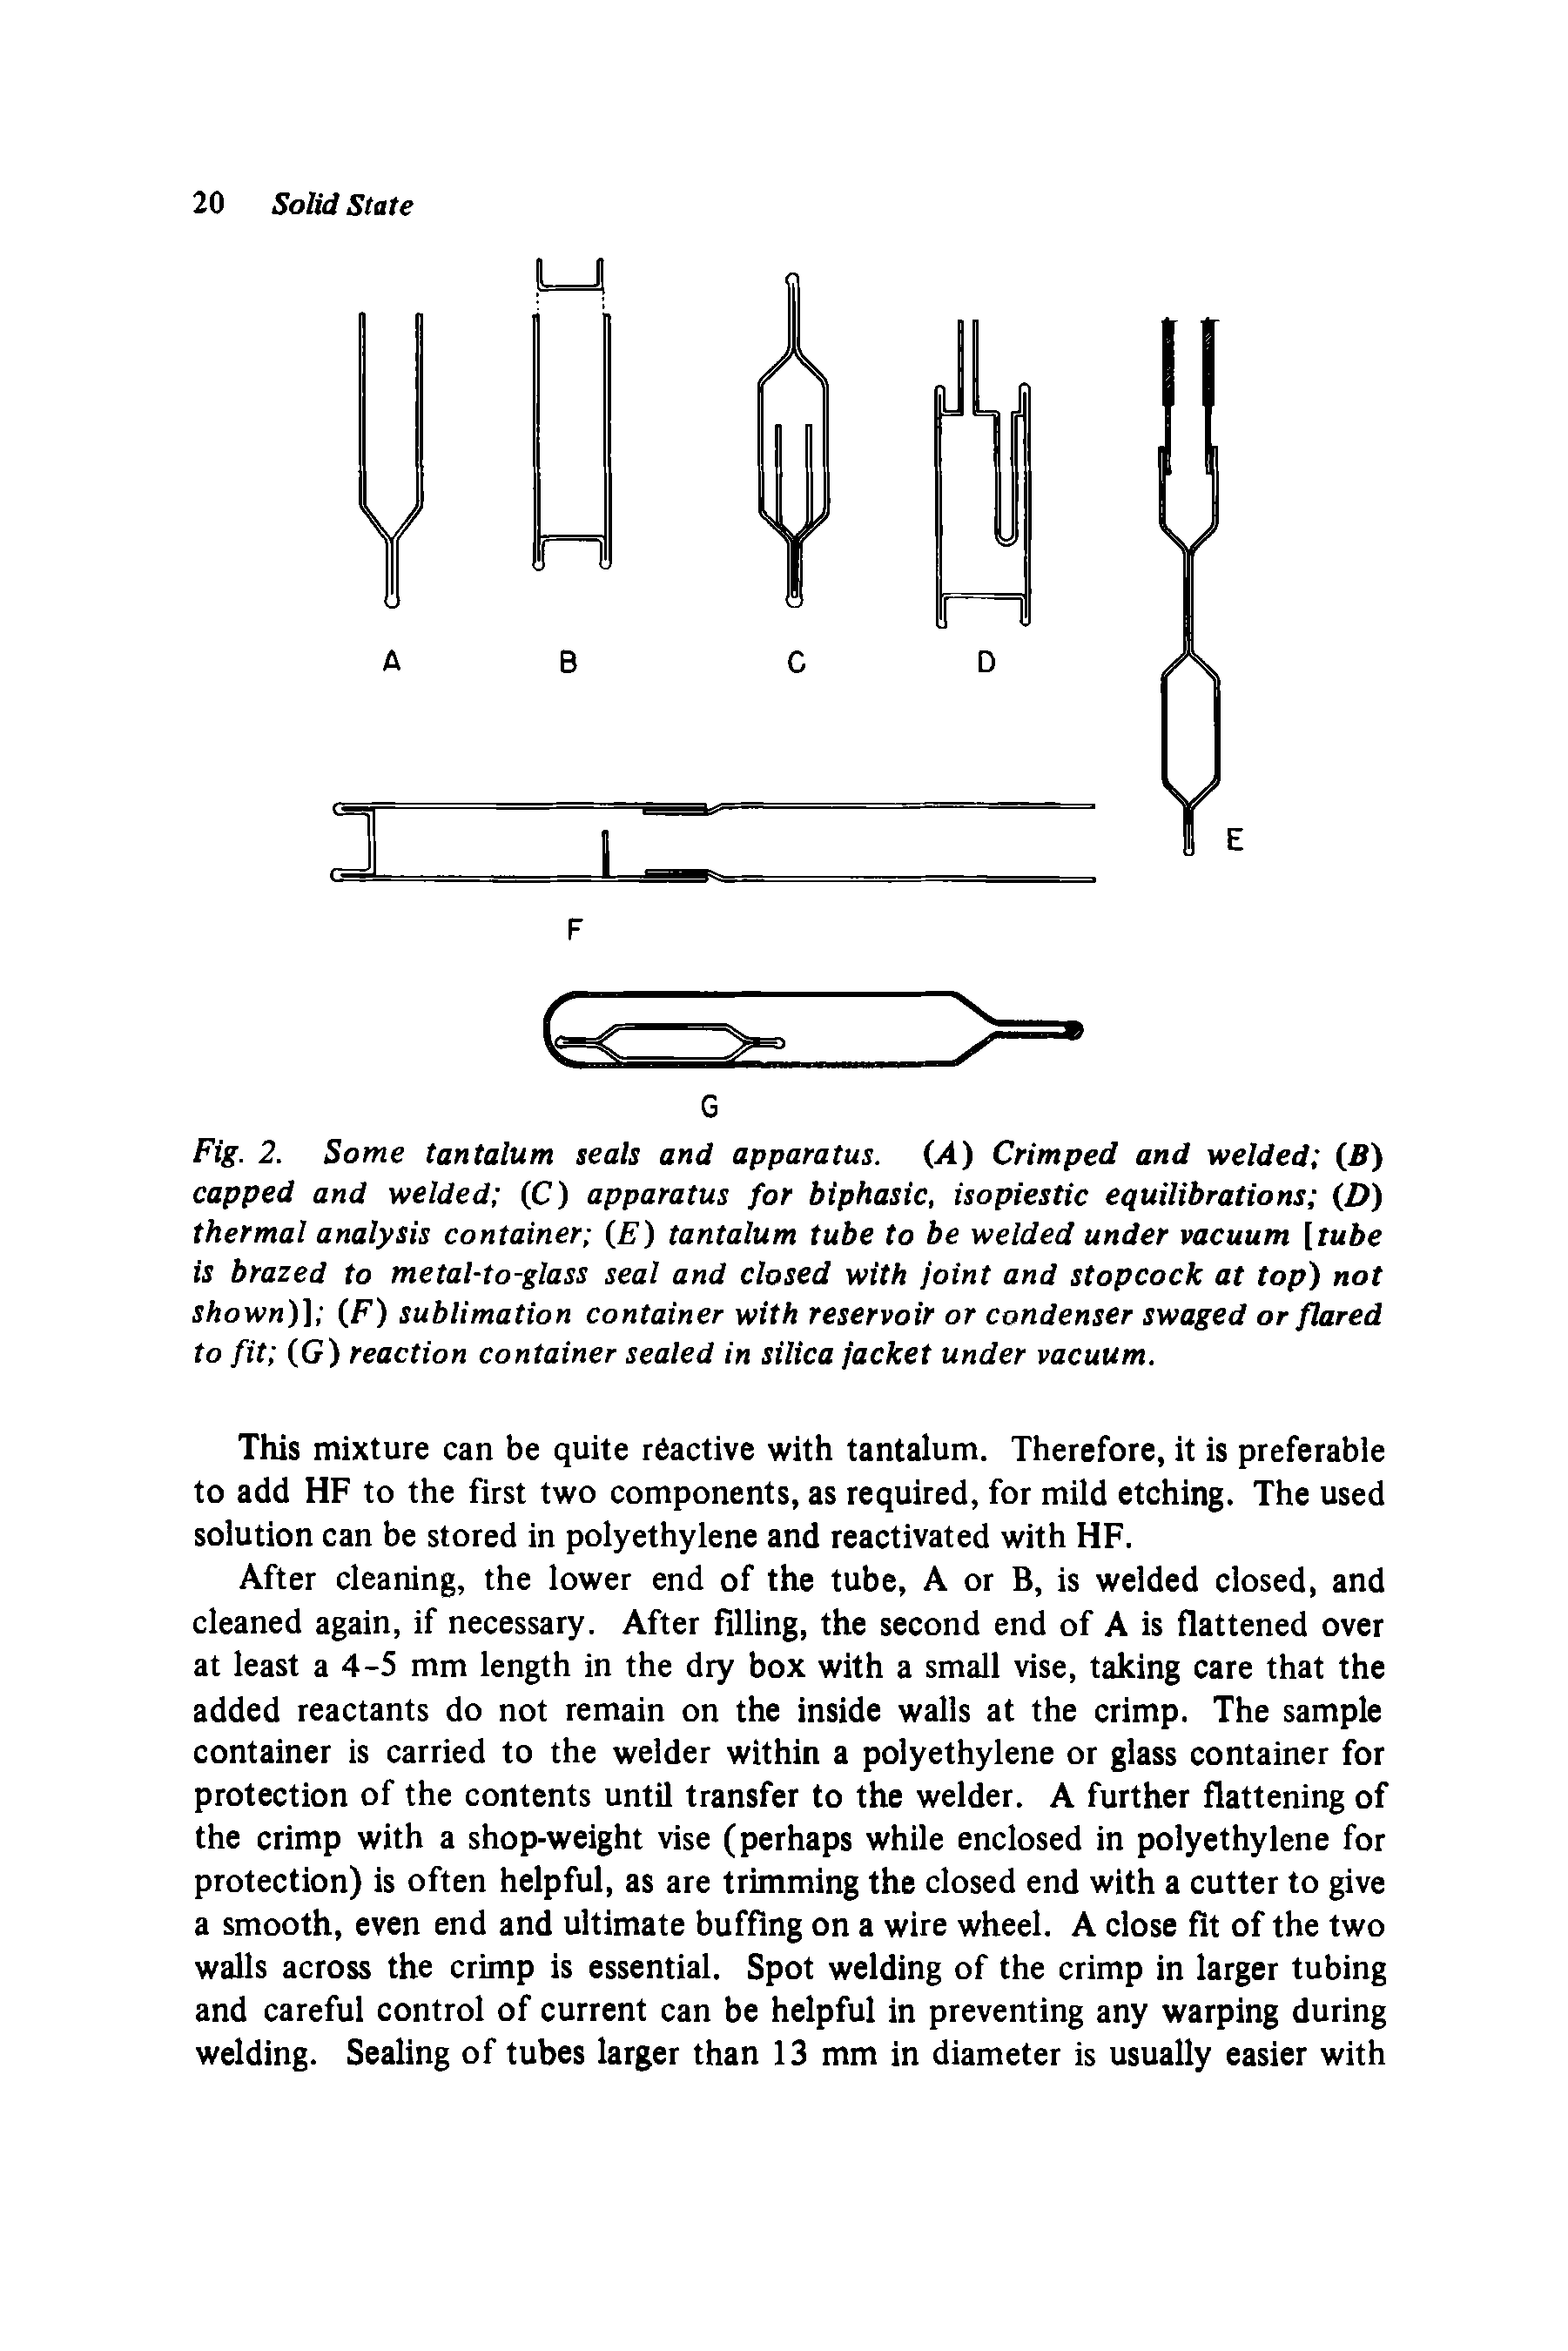 Fig. 2. Some tantalum seals and apparatus. (A) Crimped and welded (B) capped and welded (C) apparatus for biphasic, isopiestic equilibrations (D) thermal analysis container (E) tantalum tube to be welded under vacuum [tube is brazed to metal-to-glass seal and closed with joint and stopcock at top) not shown)] (F) sublimation container with reservoir or condenser swaged or flared to fit (G) reaction container sealed in silica jacket under vacuum.